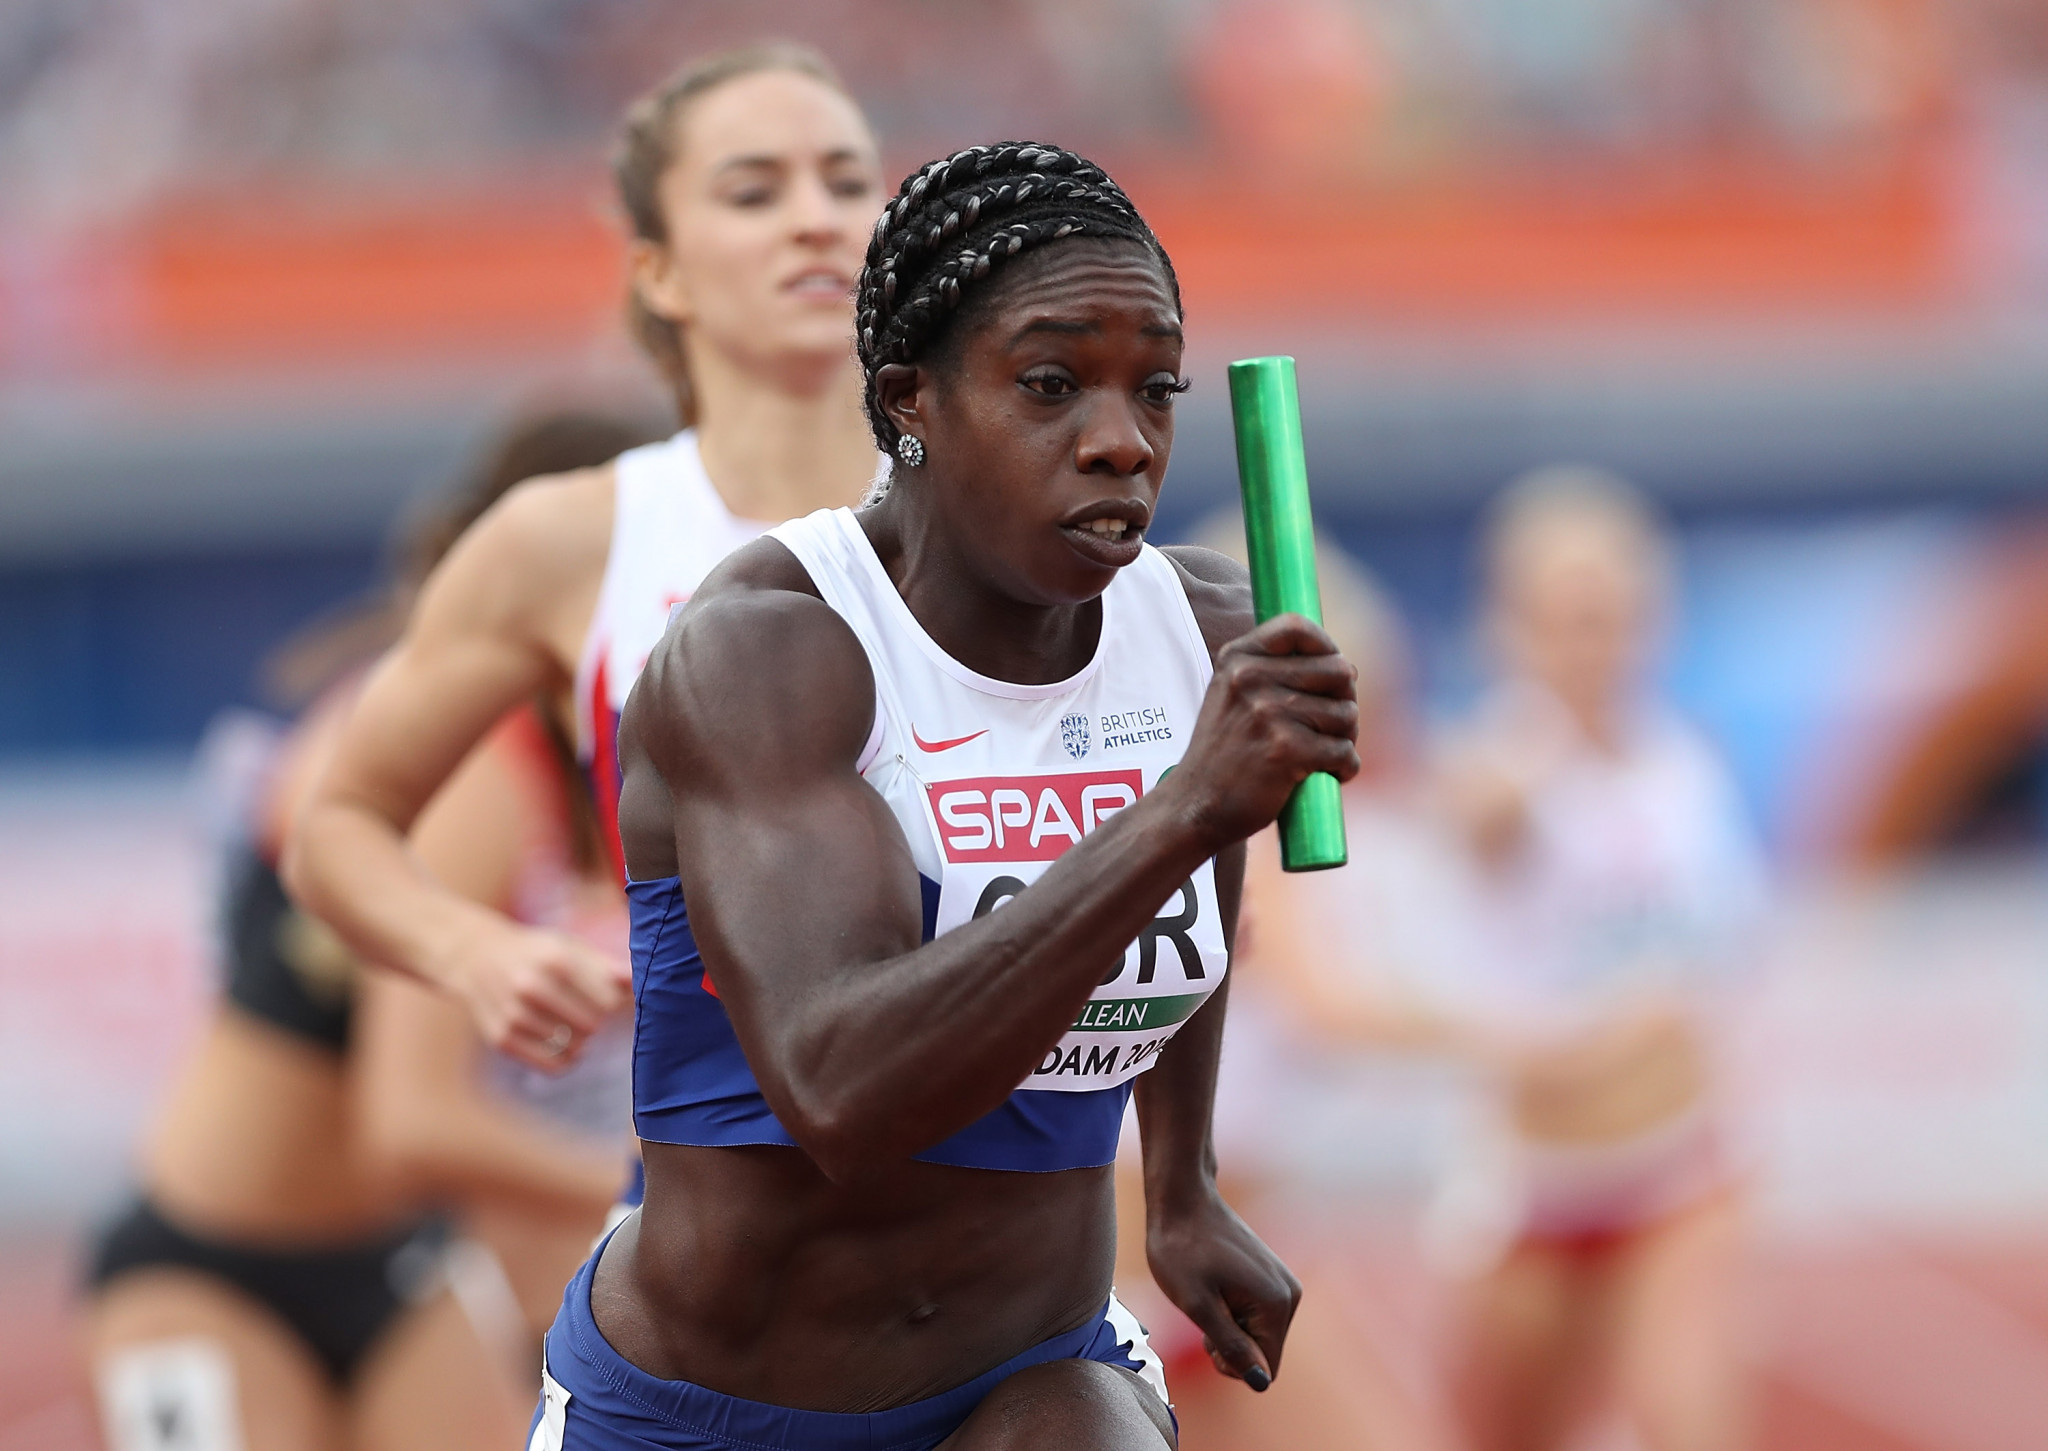 Anyika Onuora will co-captain England's athletics team at Gold Coast 2018 with Tom Bosworth ©Getty Images